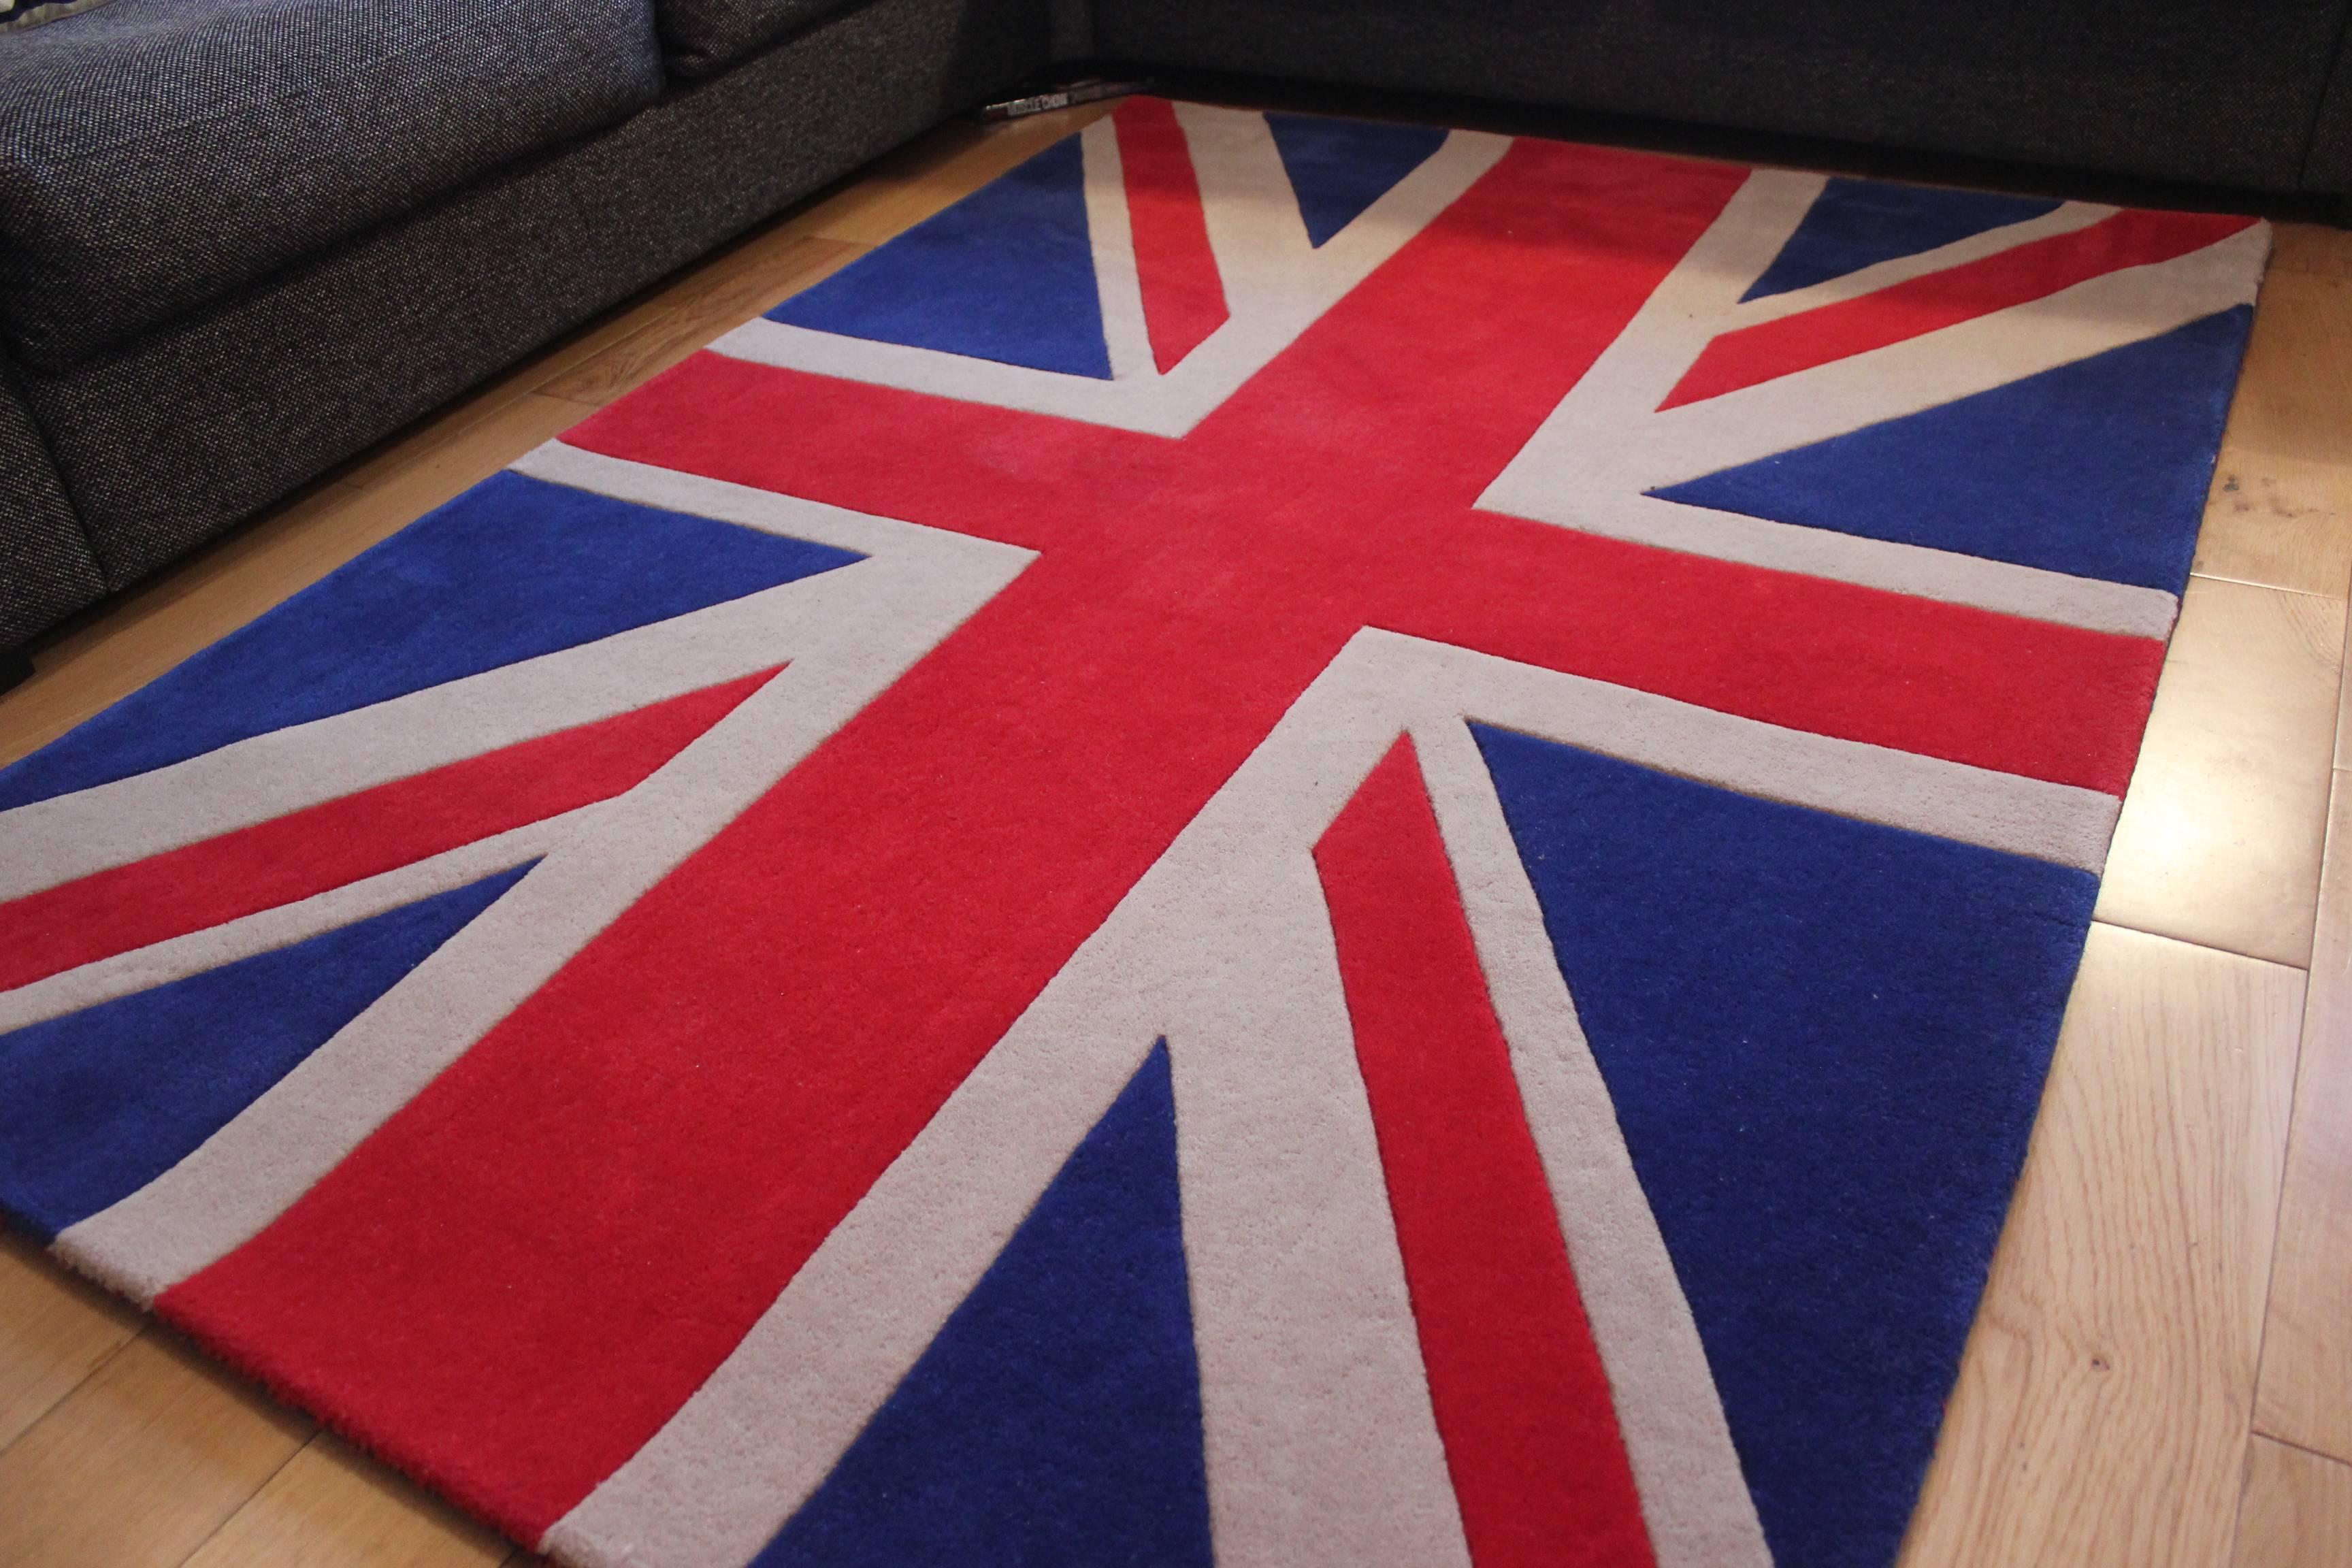 Hand-tufted carpet with Union Jack design. Made using 100% of high quality New Zealand wool.

Measure: Pile height 12 mm (+/- 2mm)
pile weight 3.5 kg
small grooves are carved in between colors.